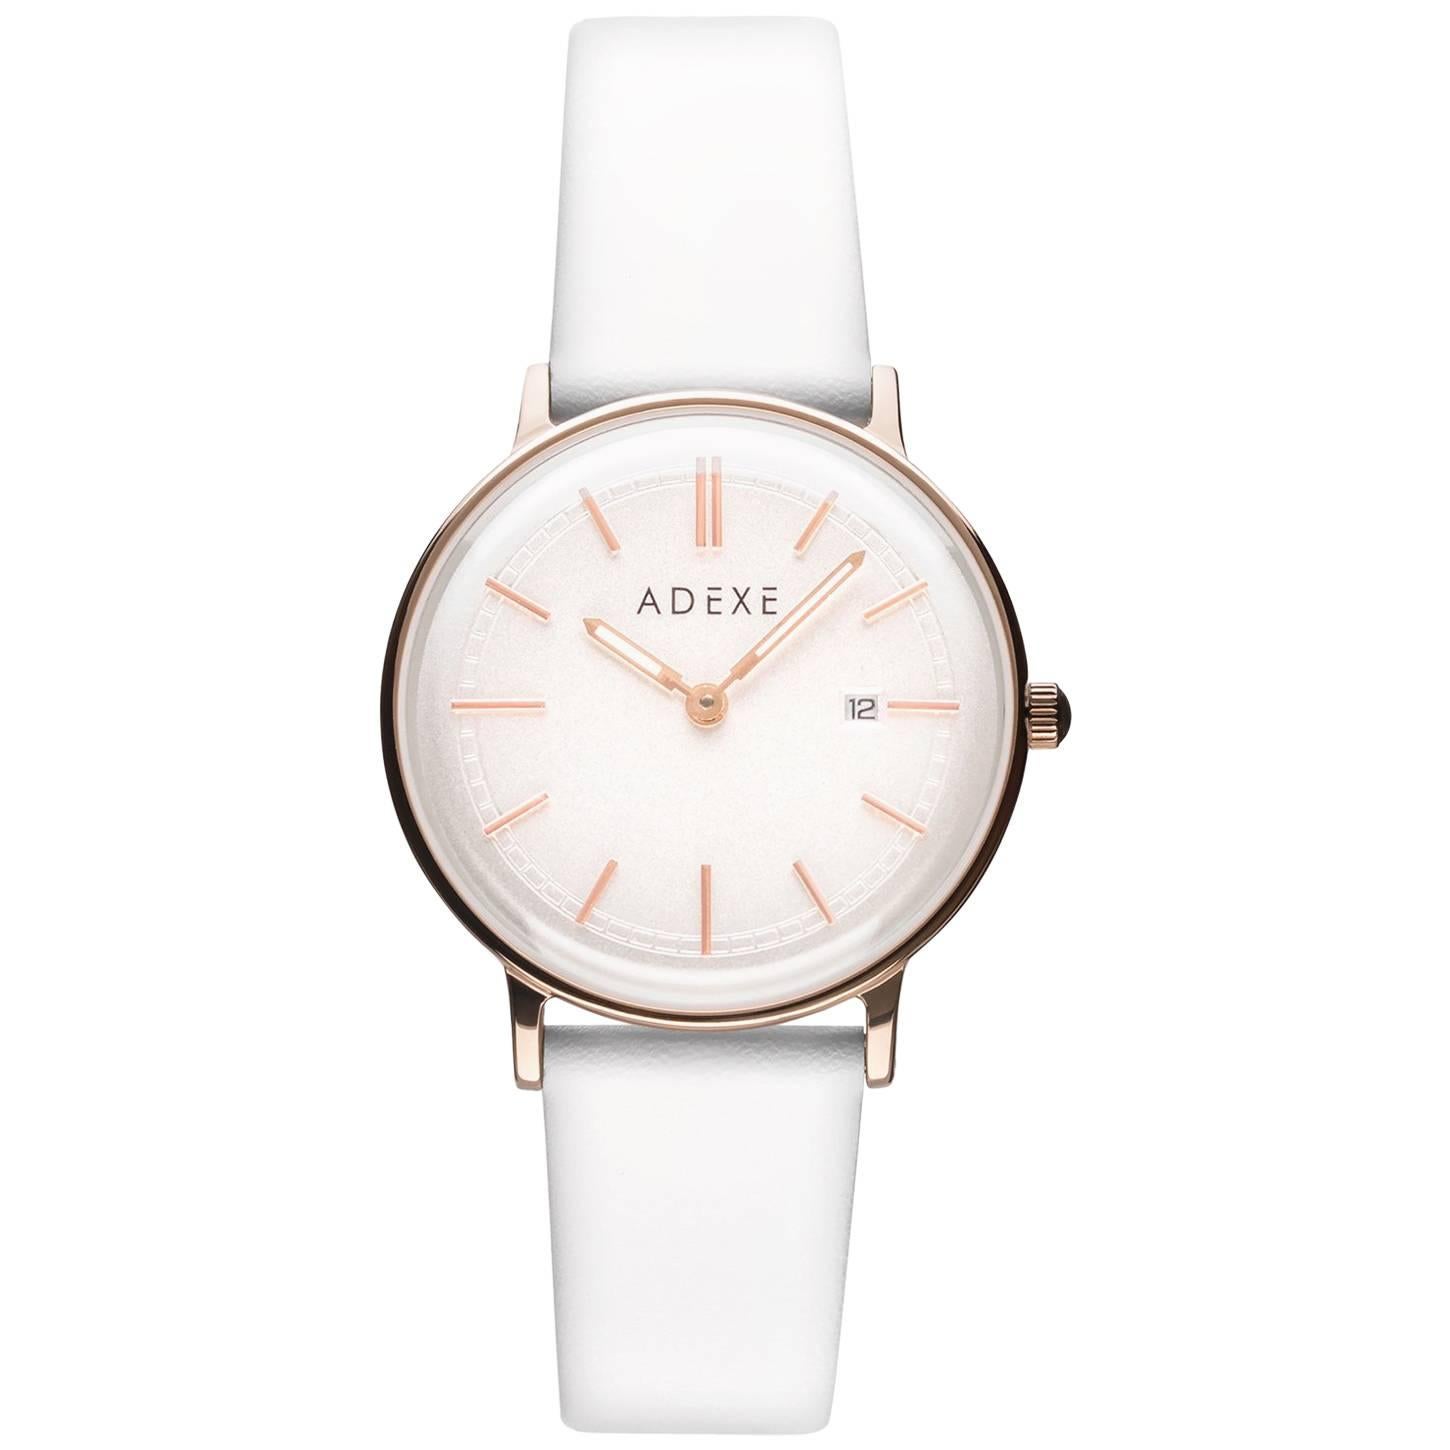 ADEXE White and Rose Gold Stainless Steel Meek Quartz Wristwatch